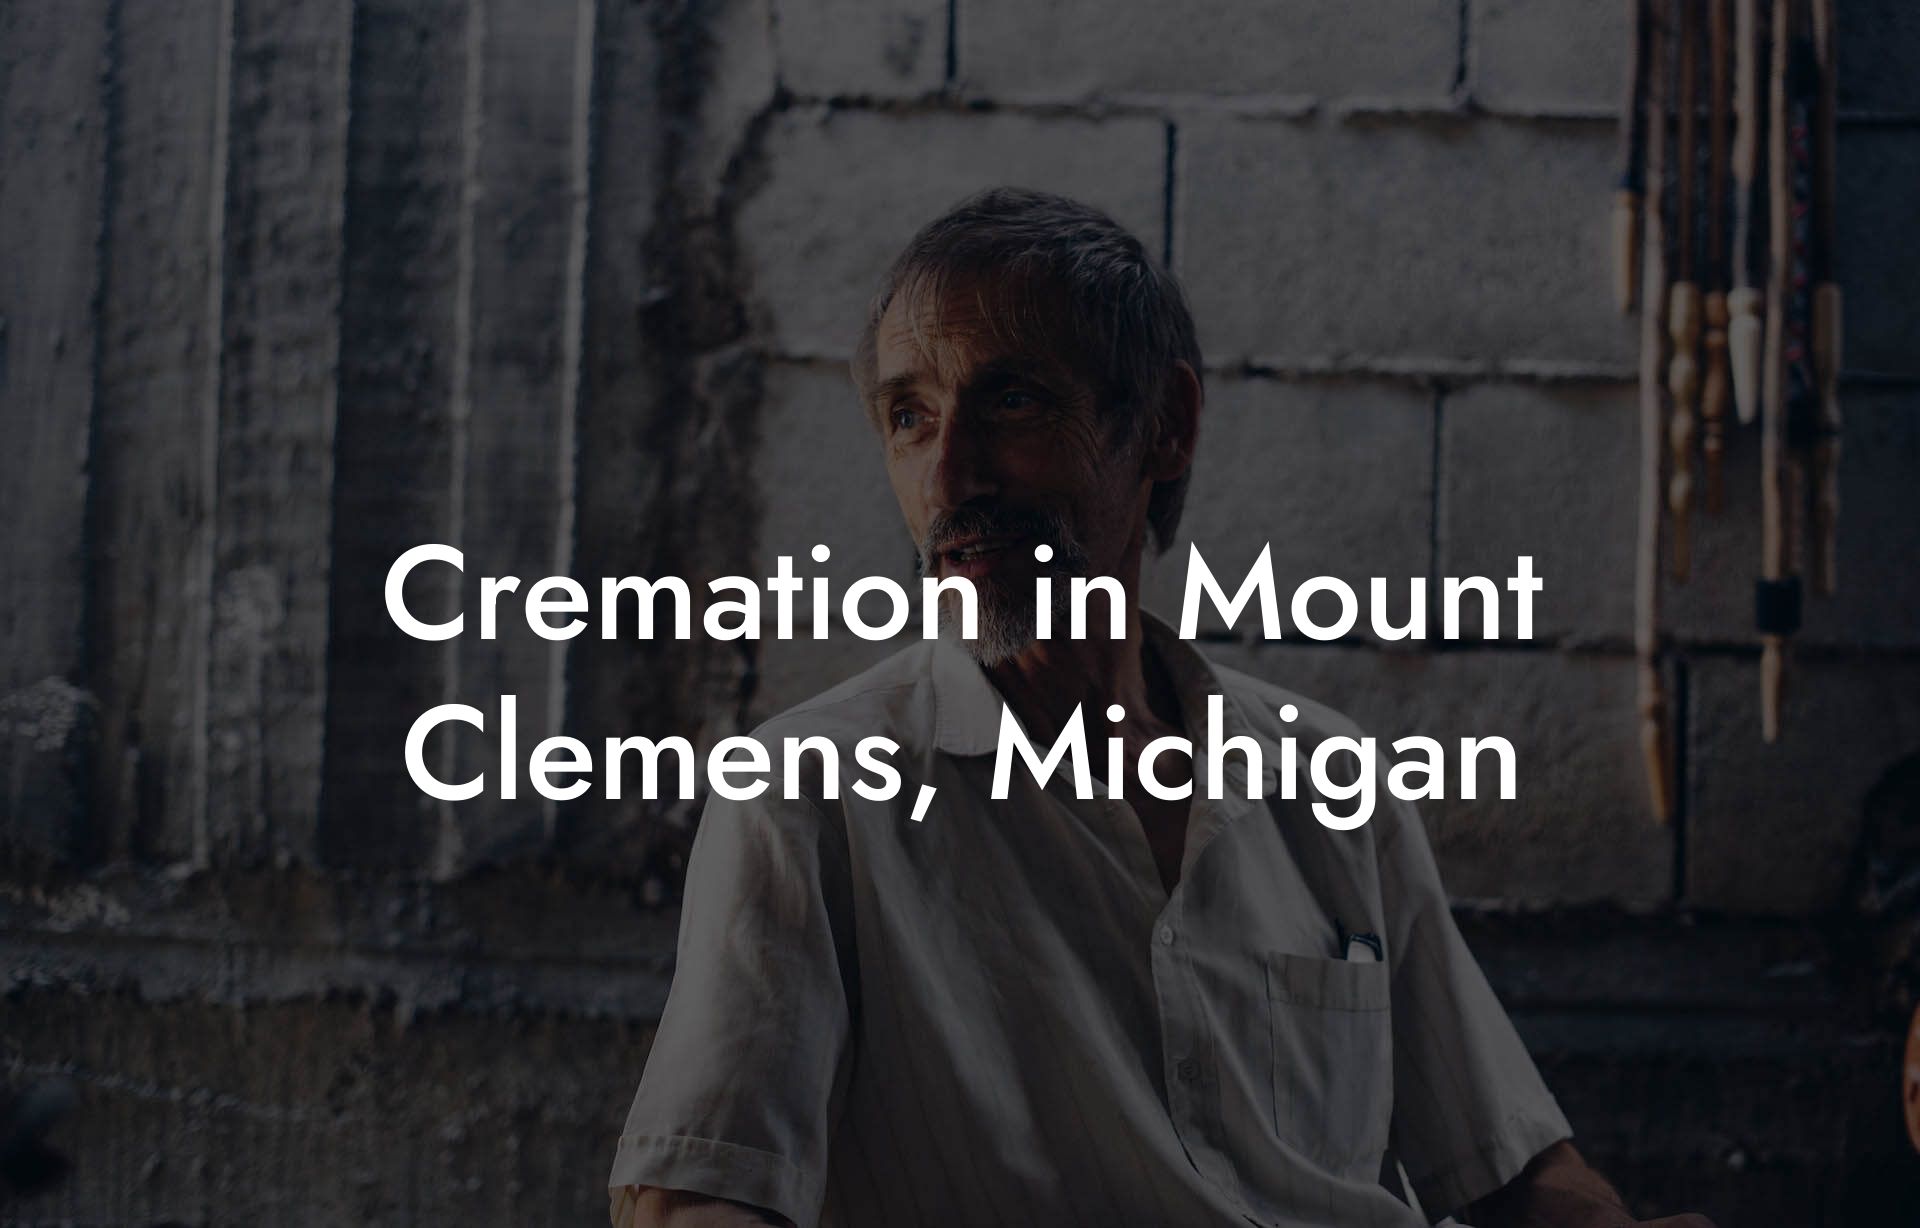 Cremation in Mount Clemens, Michigan